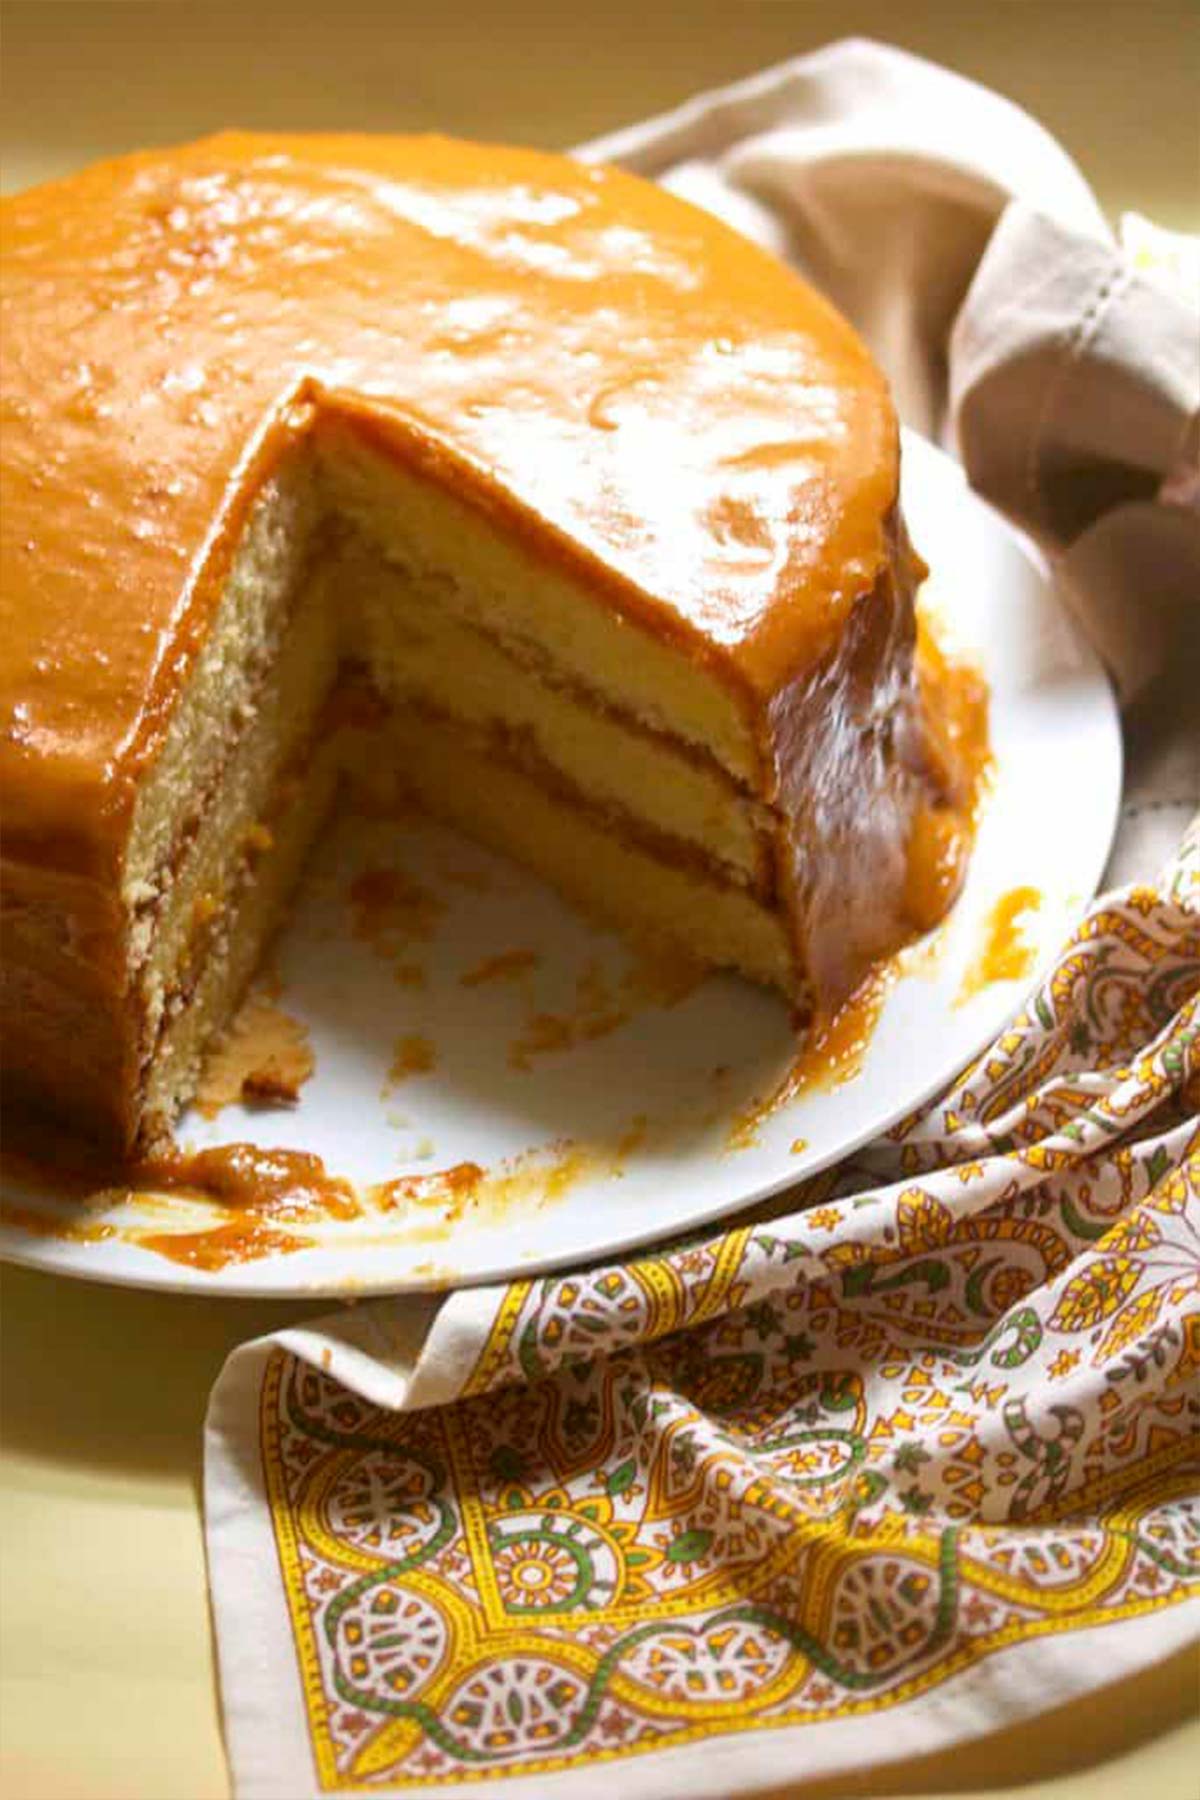 Caramel cake cut with a portion missing to show the inside of the cake.